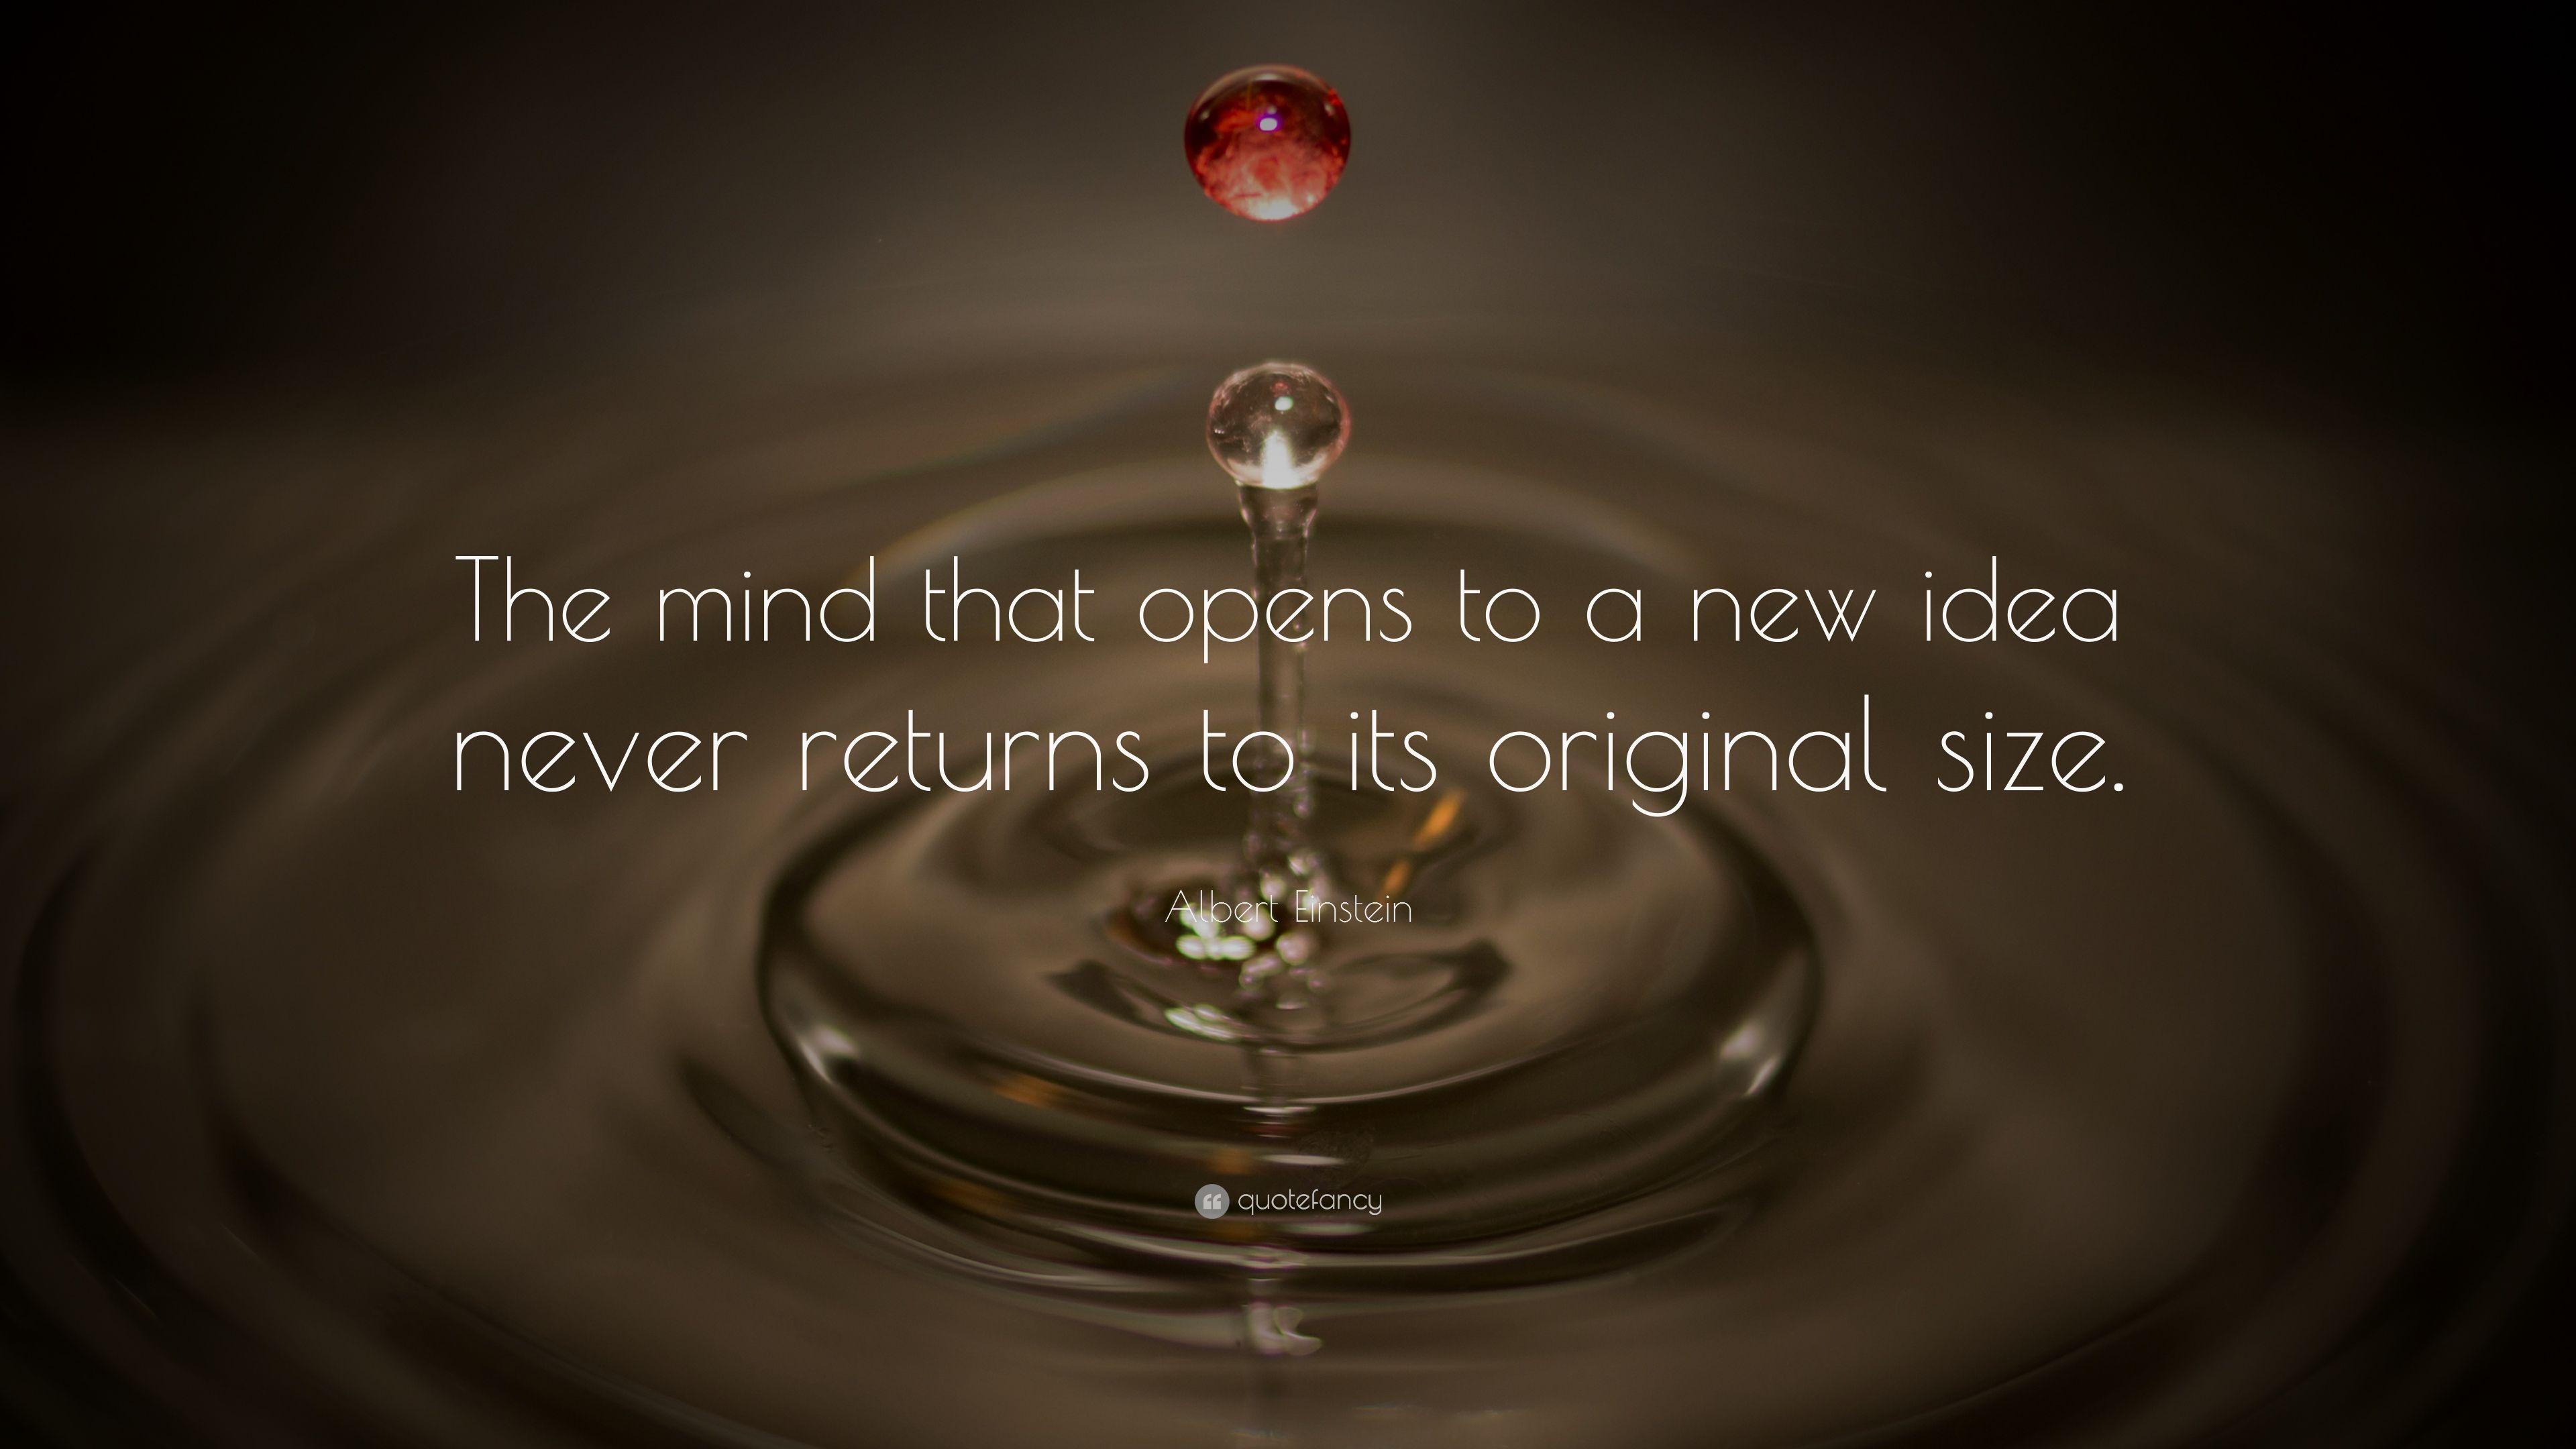 Albert Einstein Quote: “The mind that opens to a new idea never